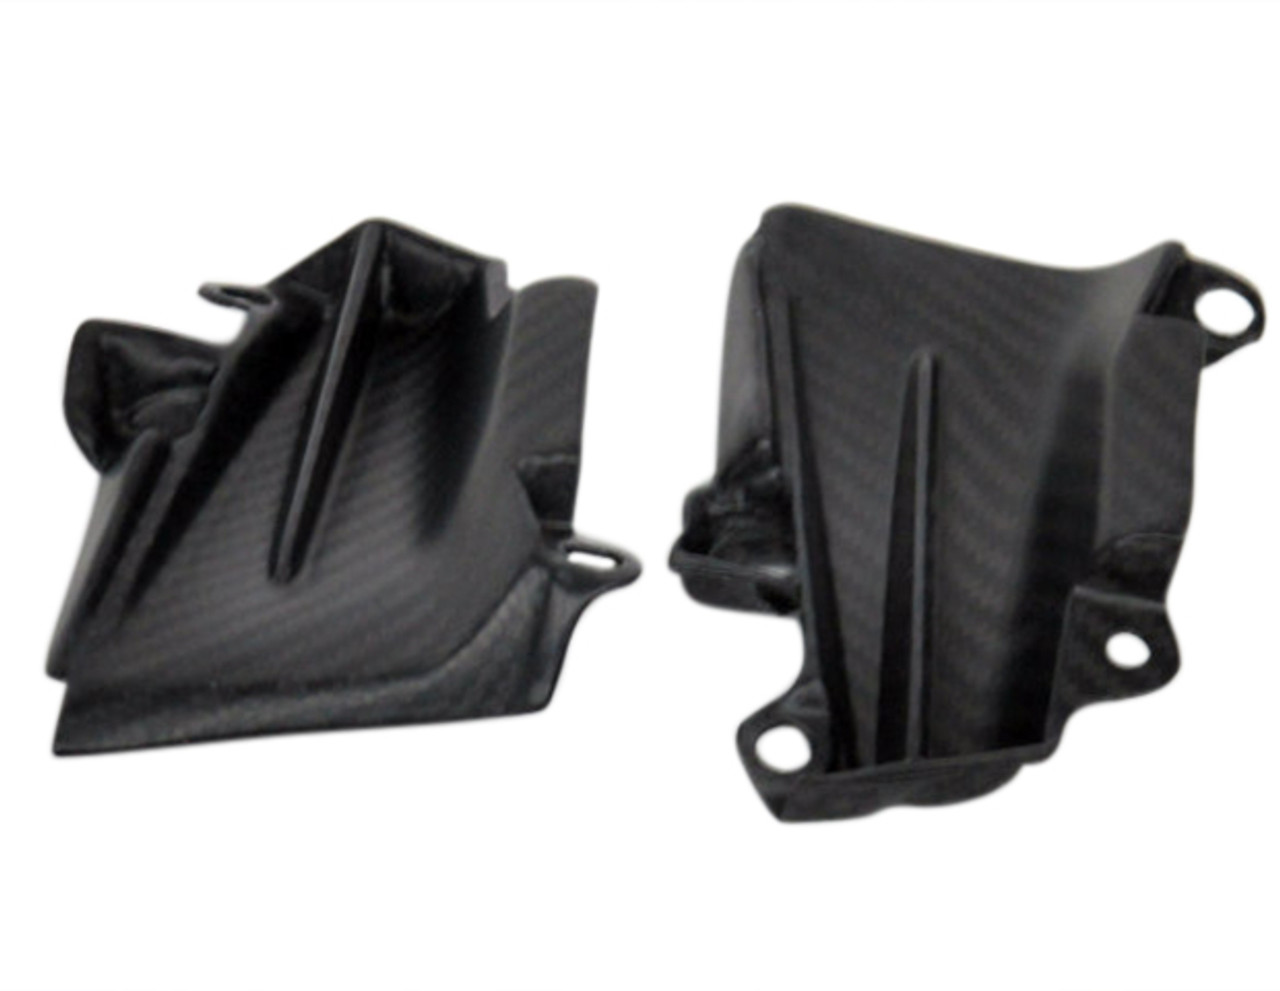 Air Intake Panels in Matte Twill Weave Carbon with Fiberglass for Kawasaki Z1000 2014+